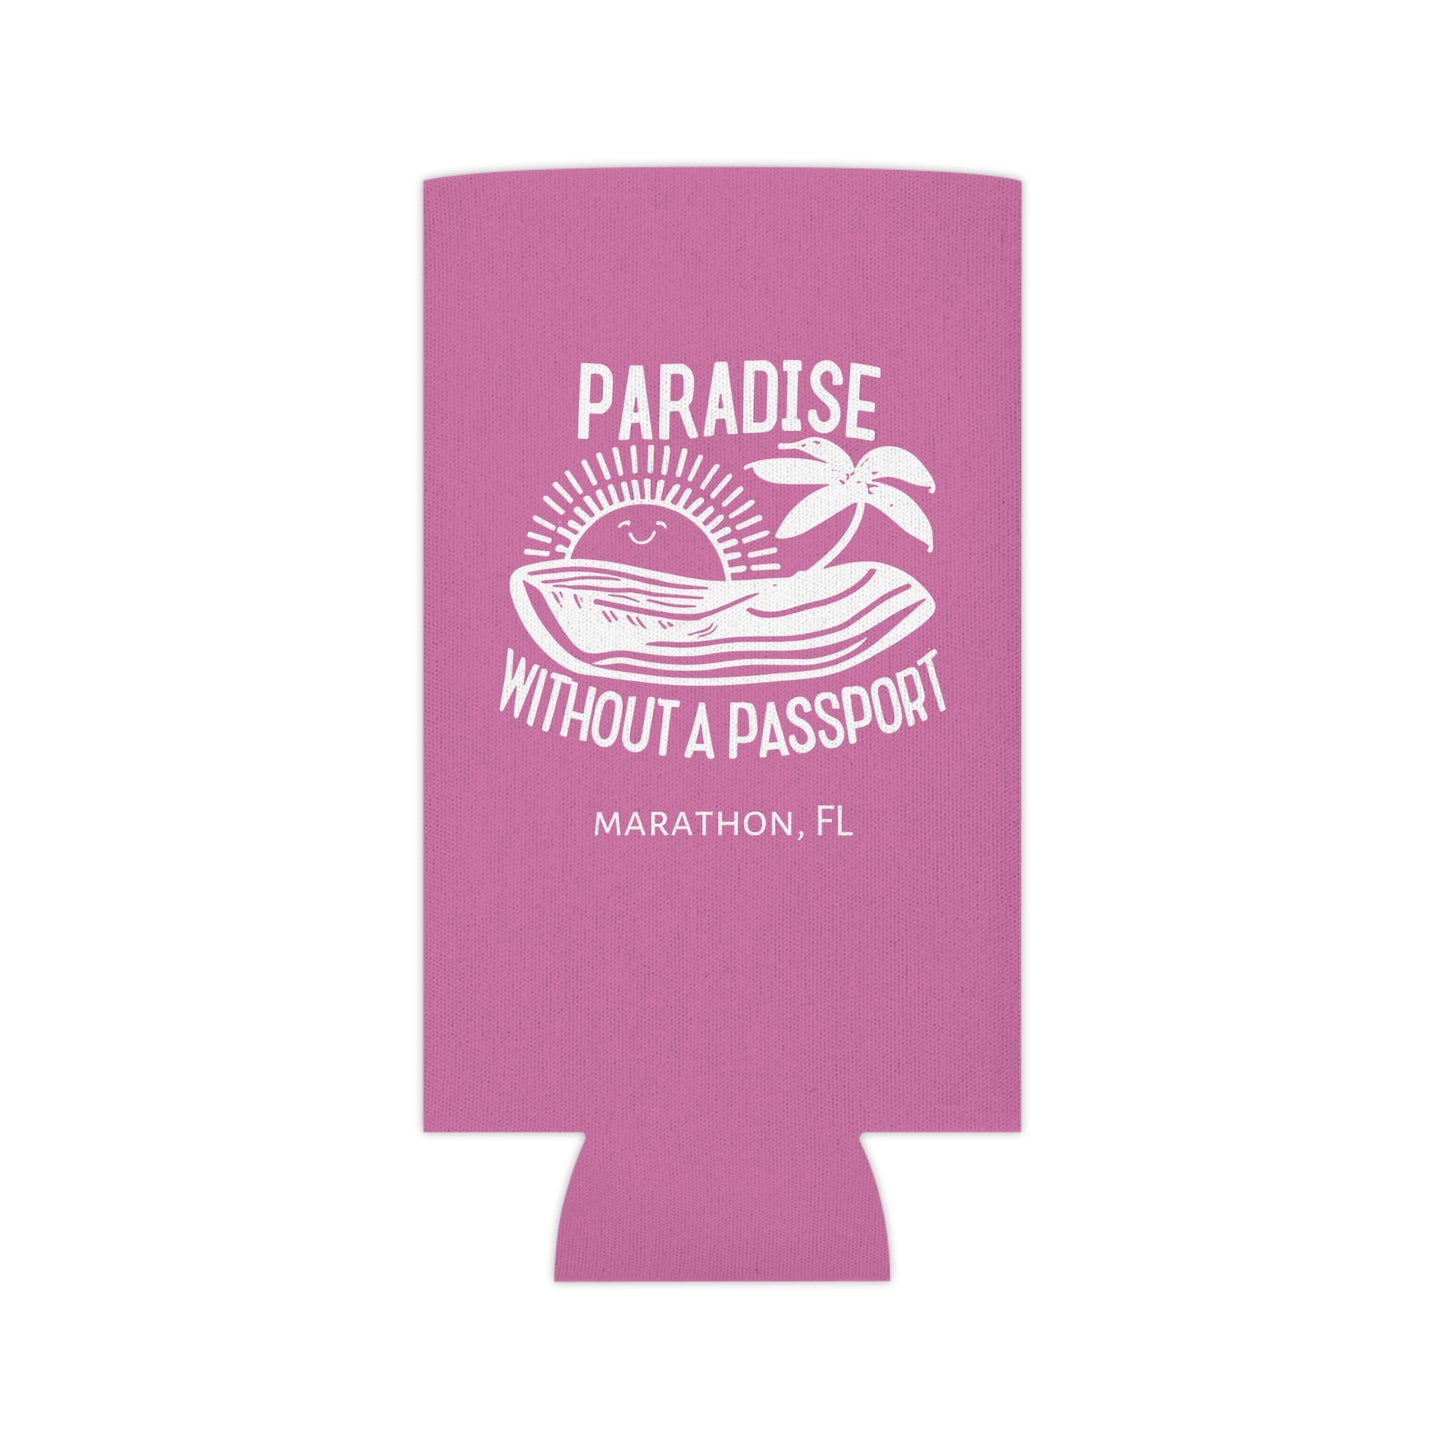 Paradise without a Passport - MARATHON FL, Pink can coozie, slim and regular cans